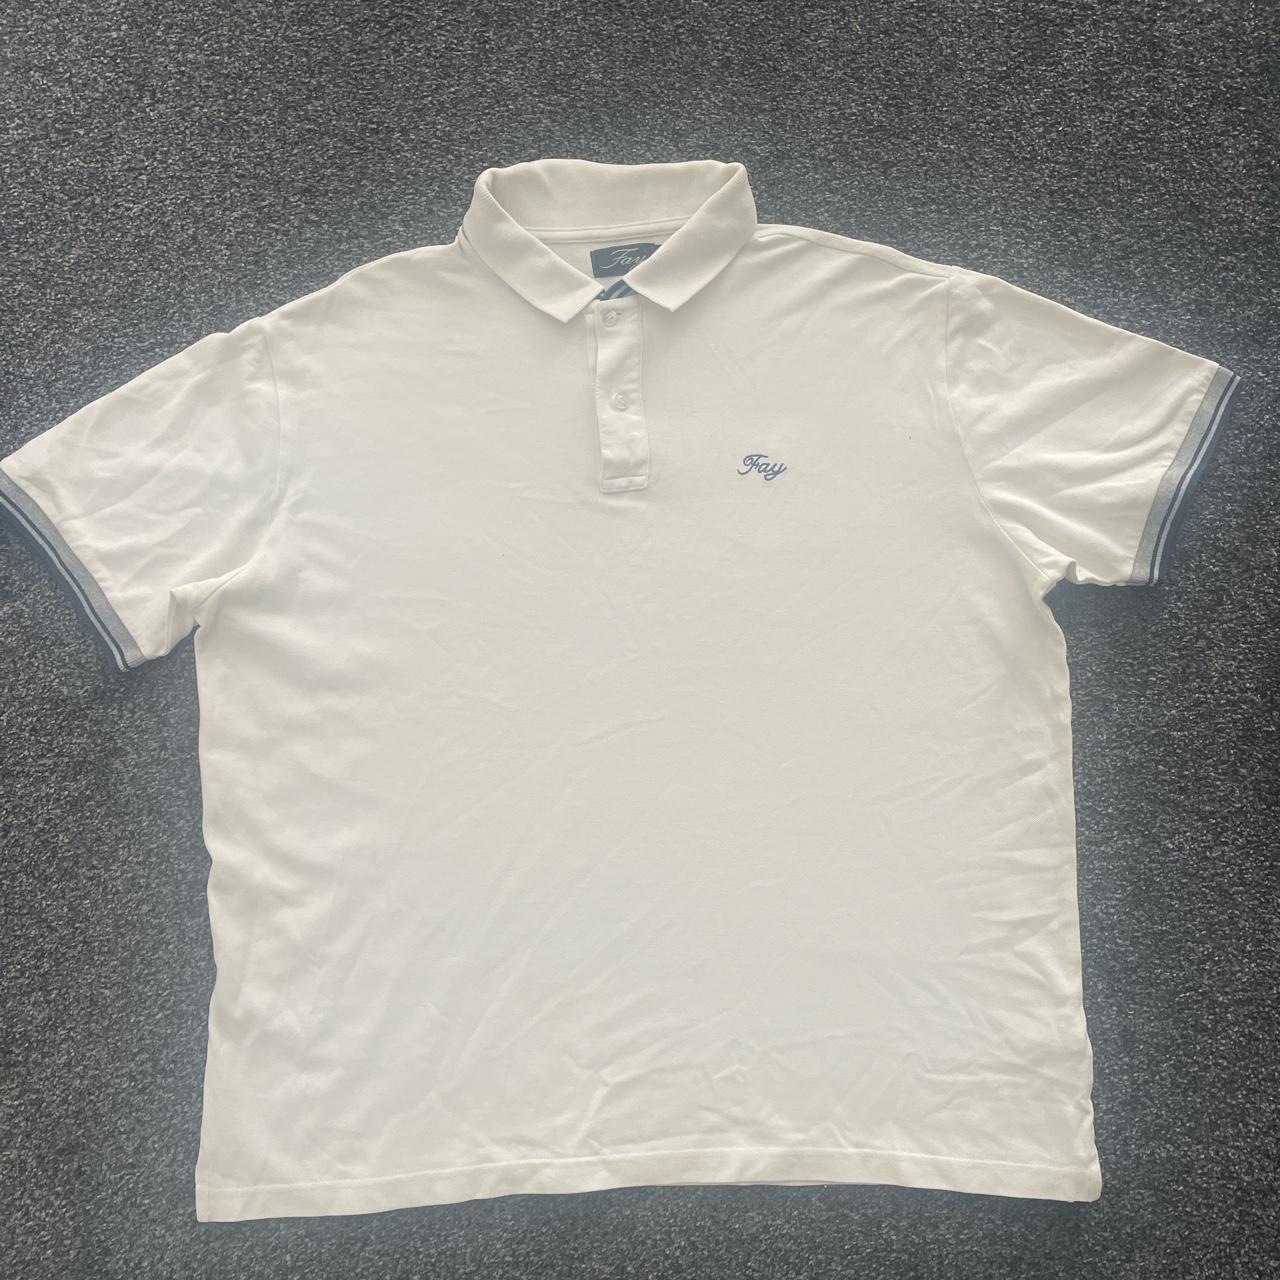 Unbranded Men's White Polo-shirts | Depop